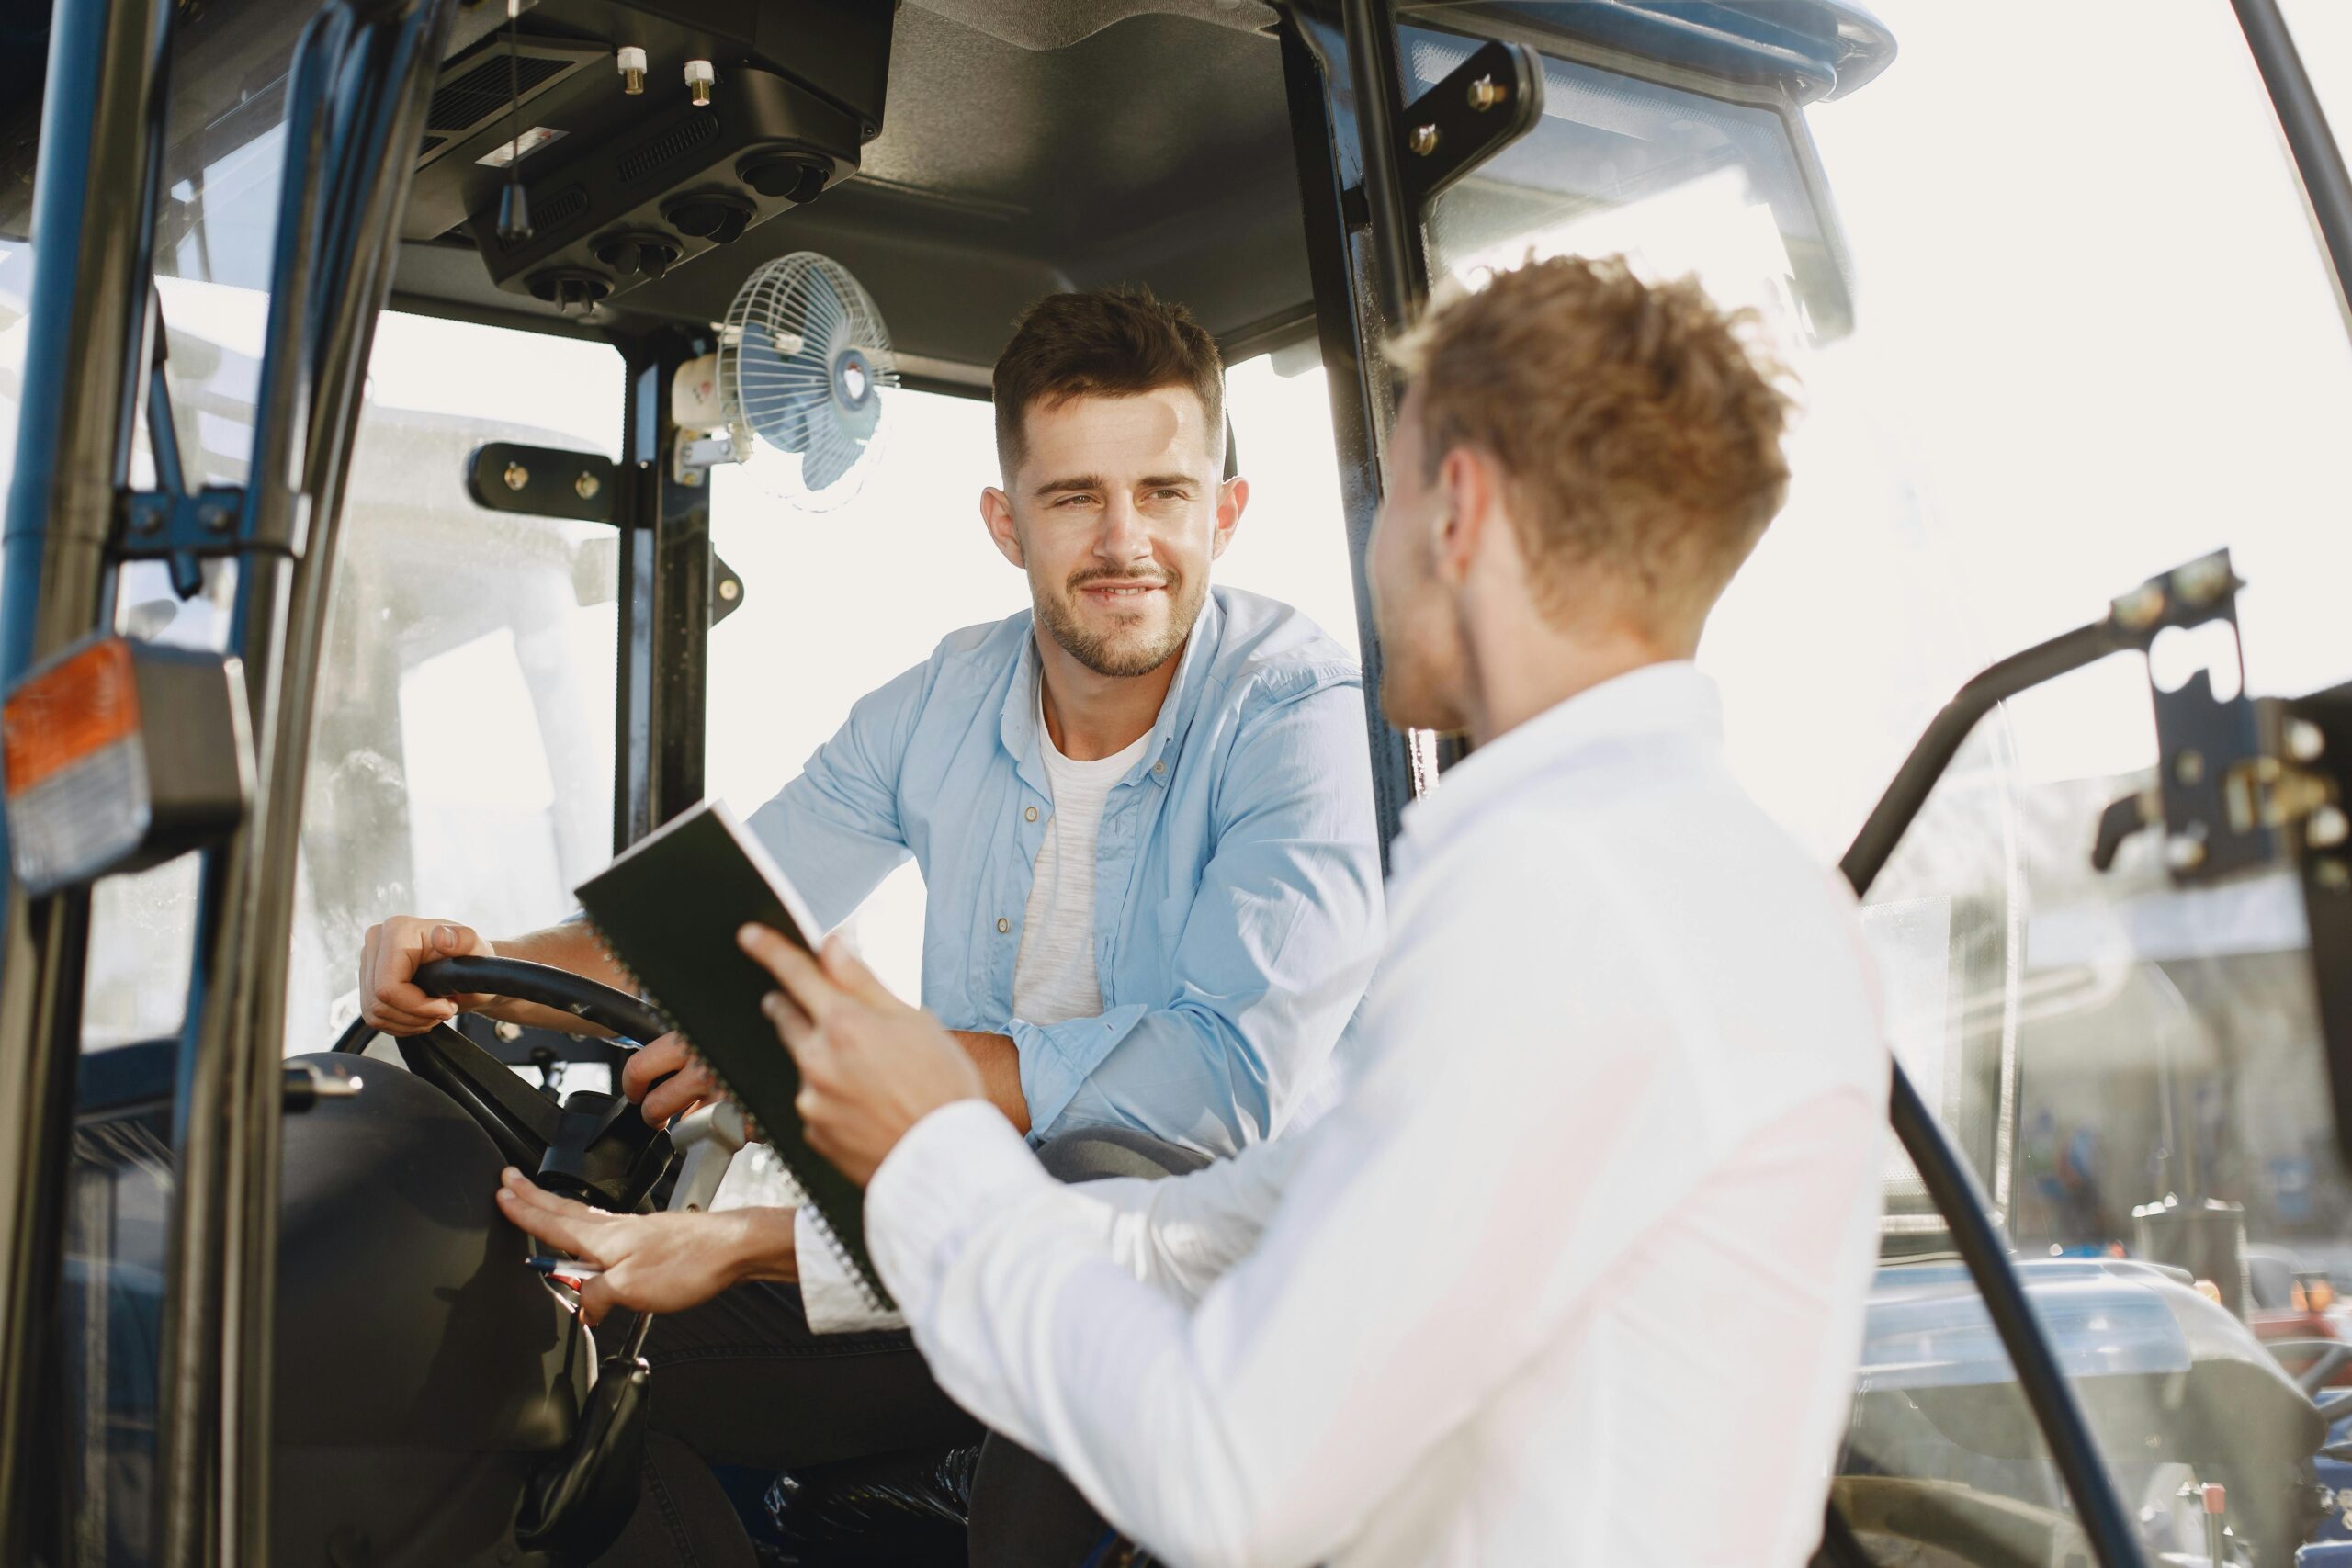 Forklift Classifications: 7 Types of Forklift Classes Explained